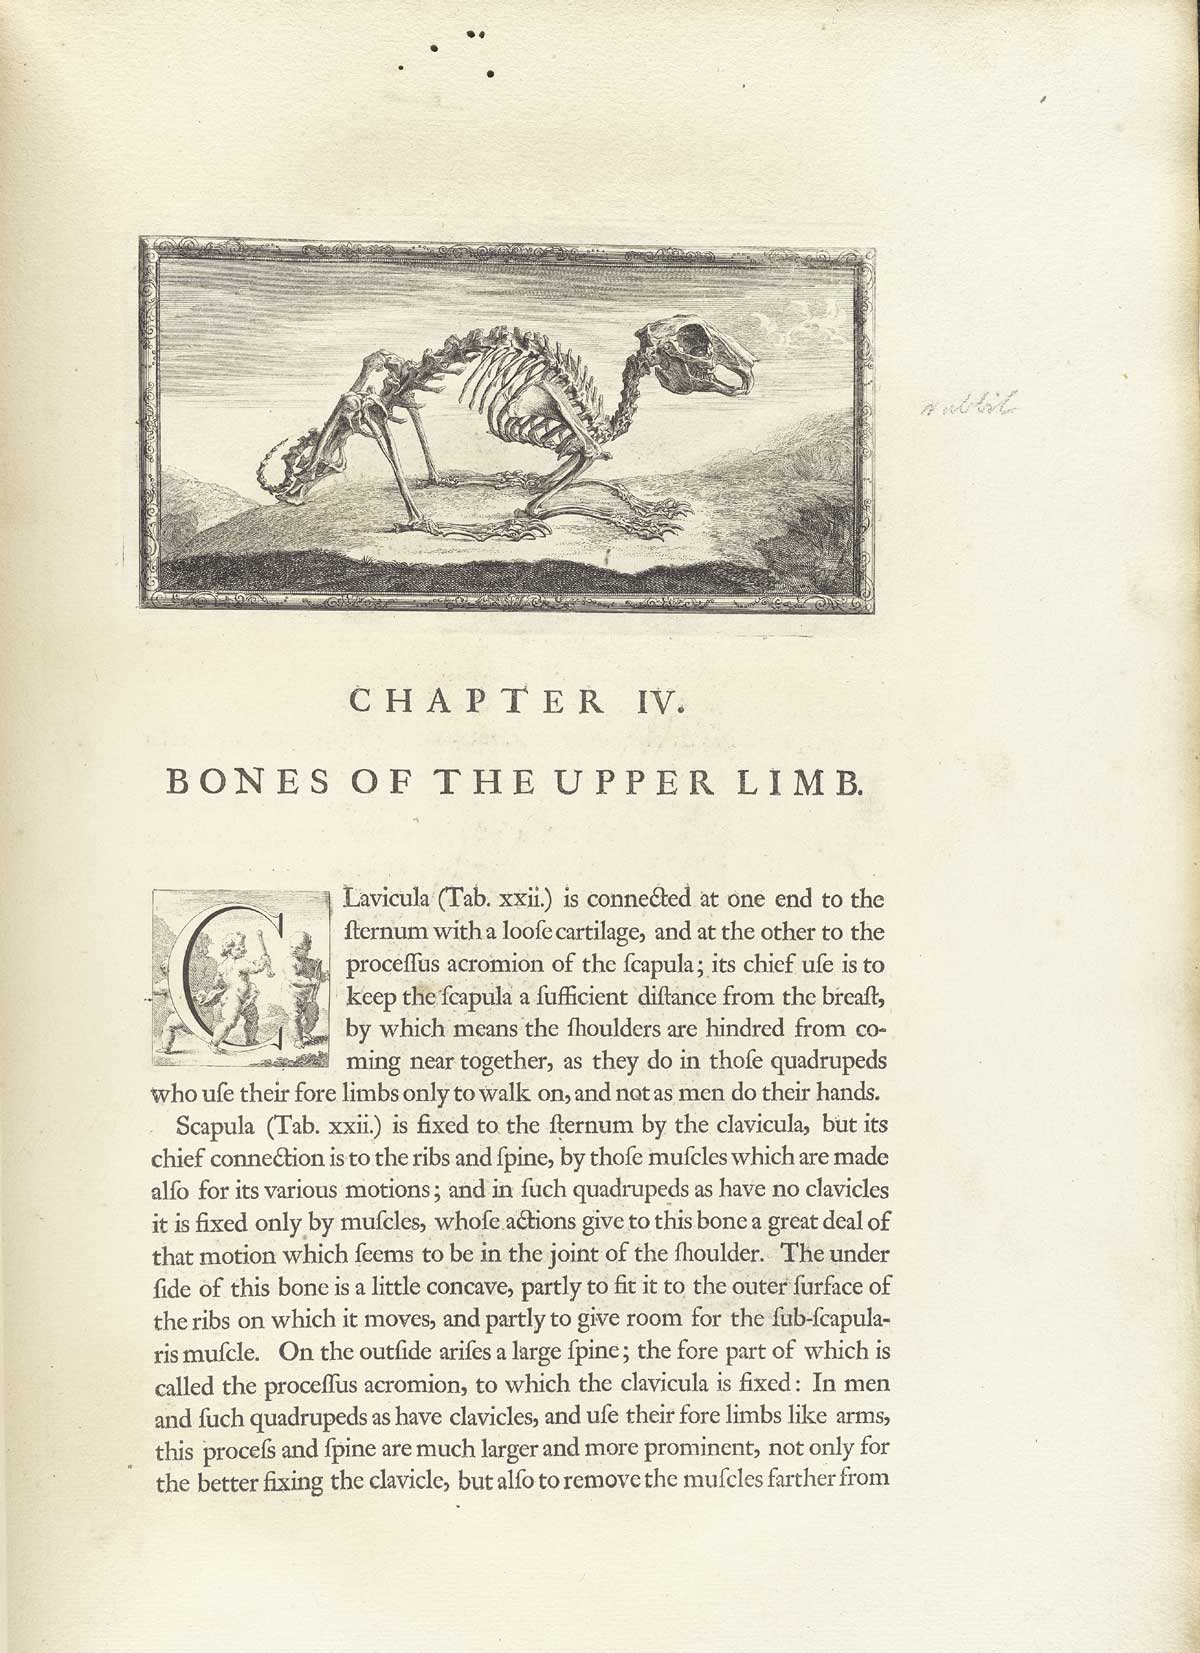 Typeset page of text with large engraved vignette at the top of the page showing the skeleton of a rabbit outdoors facing to the right seeming about to leap out of the frame, from William Cheselden’s Osteographia, NLM Call no.: WZ 260 C499o 1733.